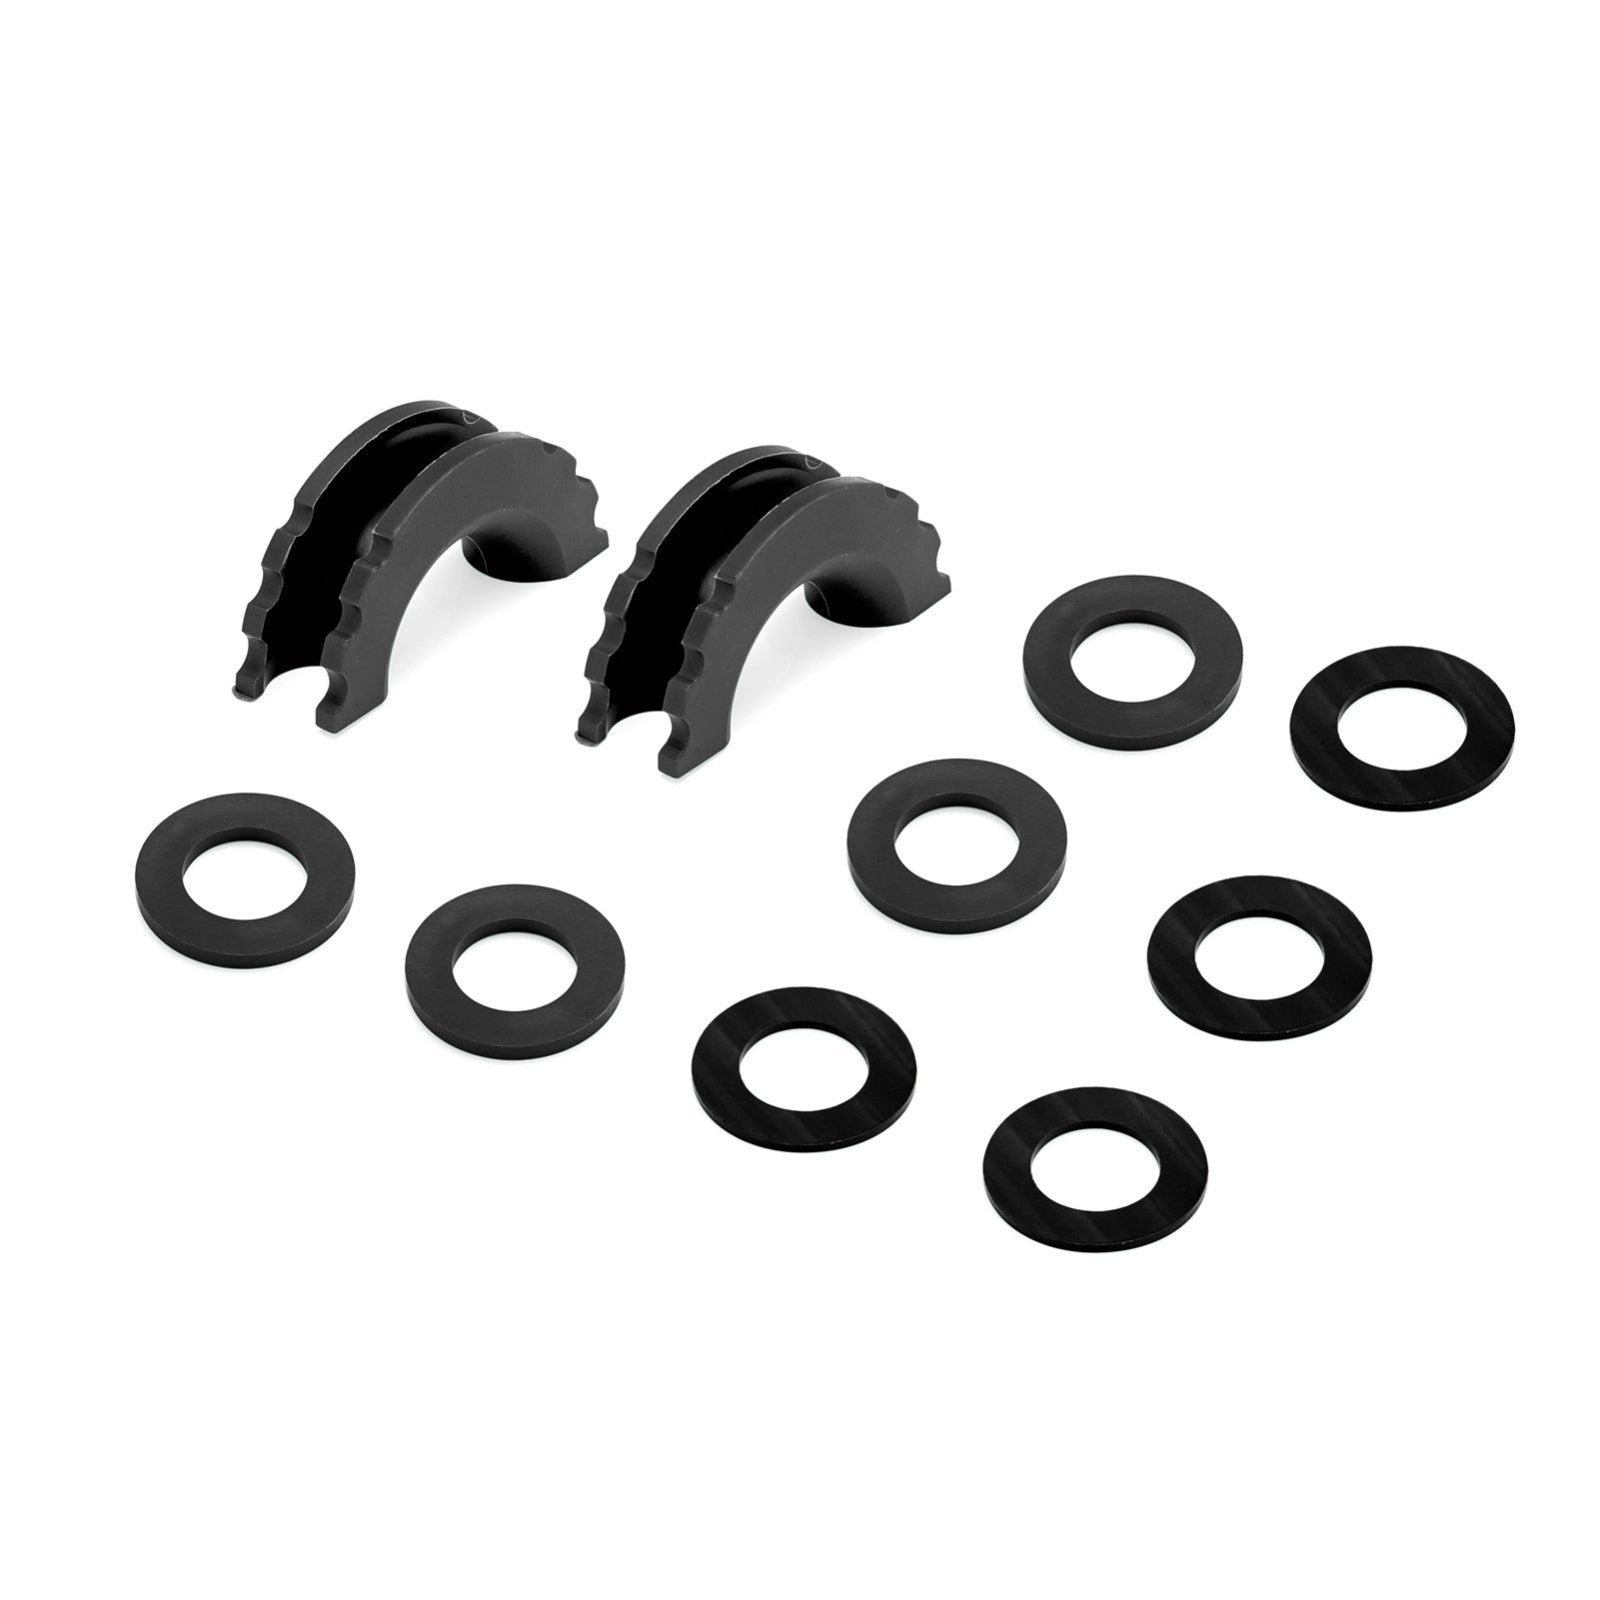 2x Black Silicone Isolators + 8x Rubber Washers Fit 3/4" D-Ring Shackle 7/8" Pin - Weisen